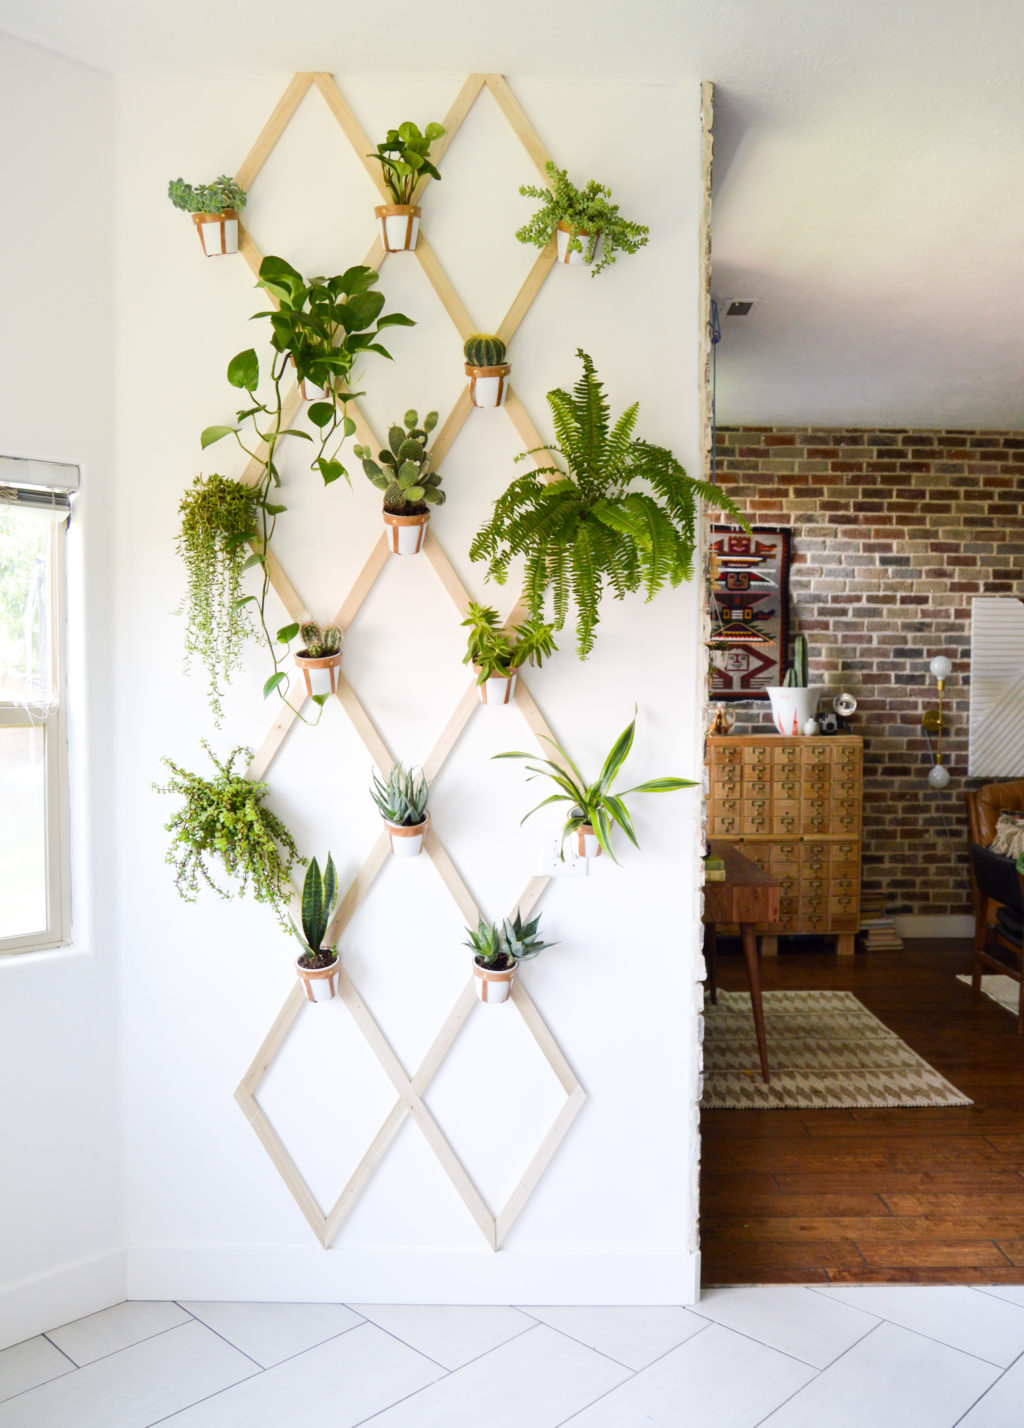 Indoor Trellis Wall with all types of plants including cacti, succulents, ferns, sanseveria, and aloe